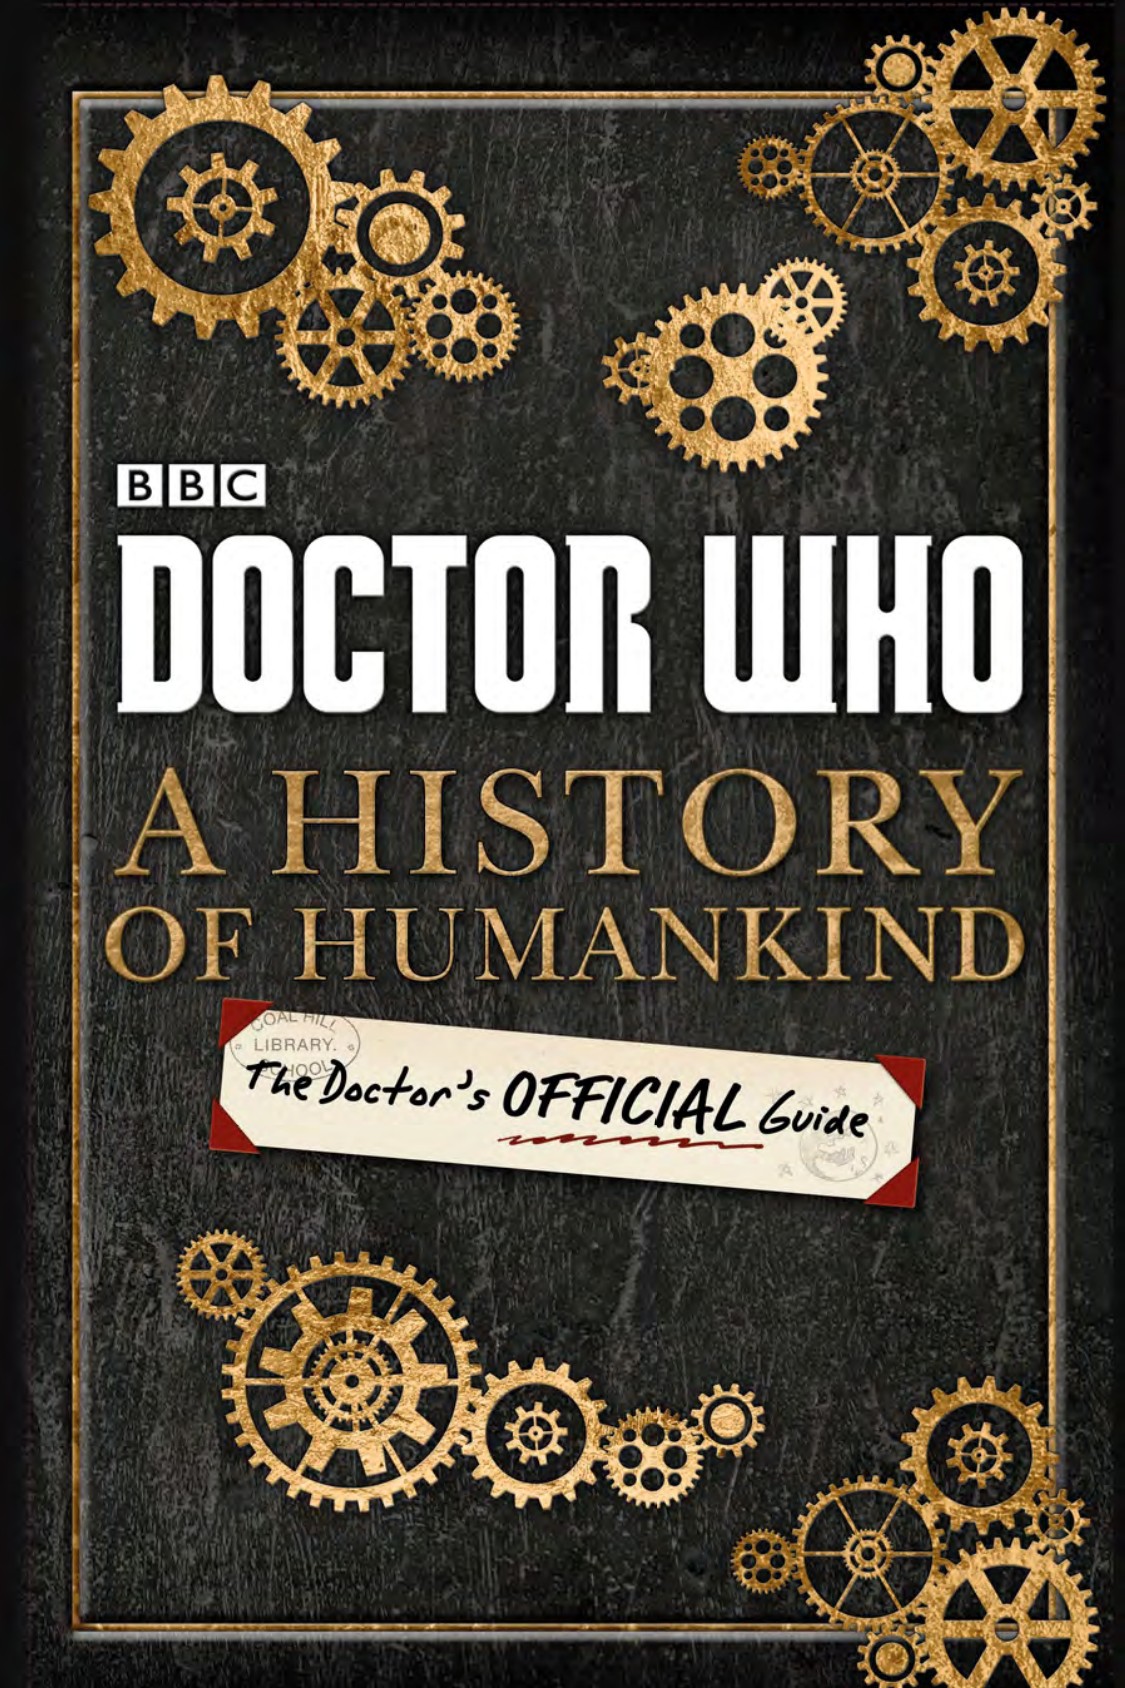 Doctor Who: A History of Humankind: The Doctor’s Official Guide